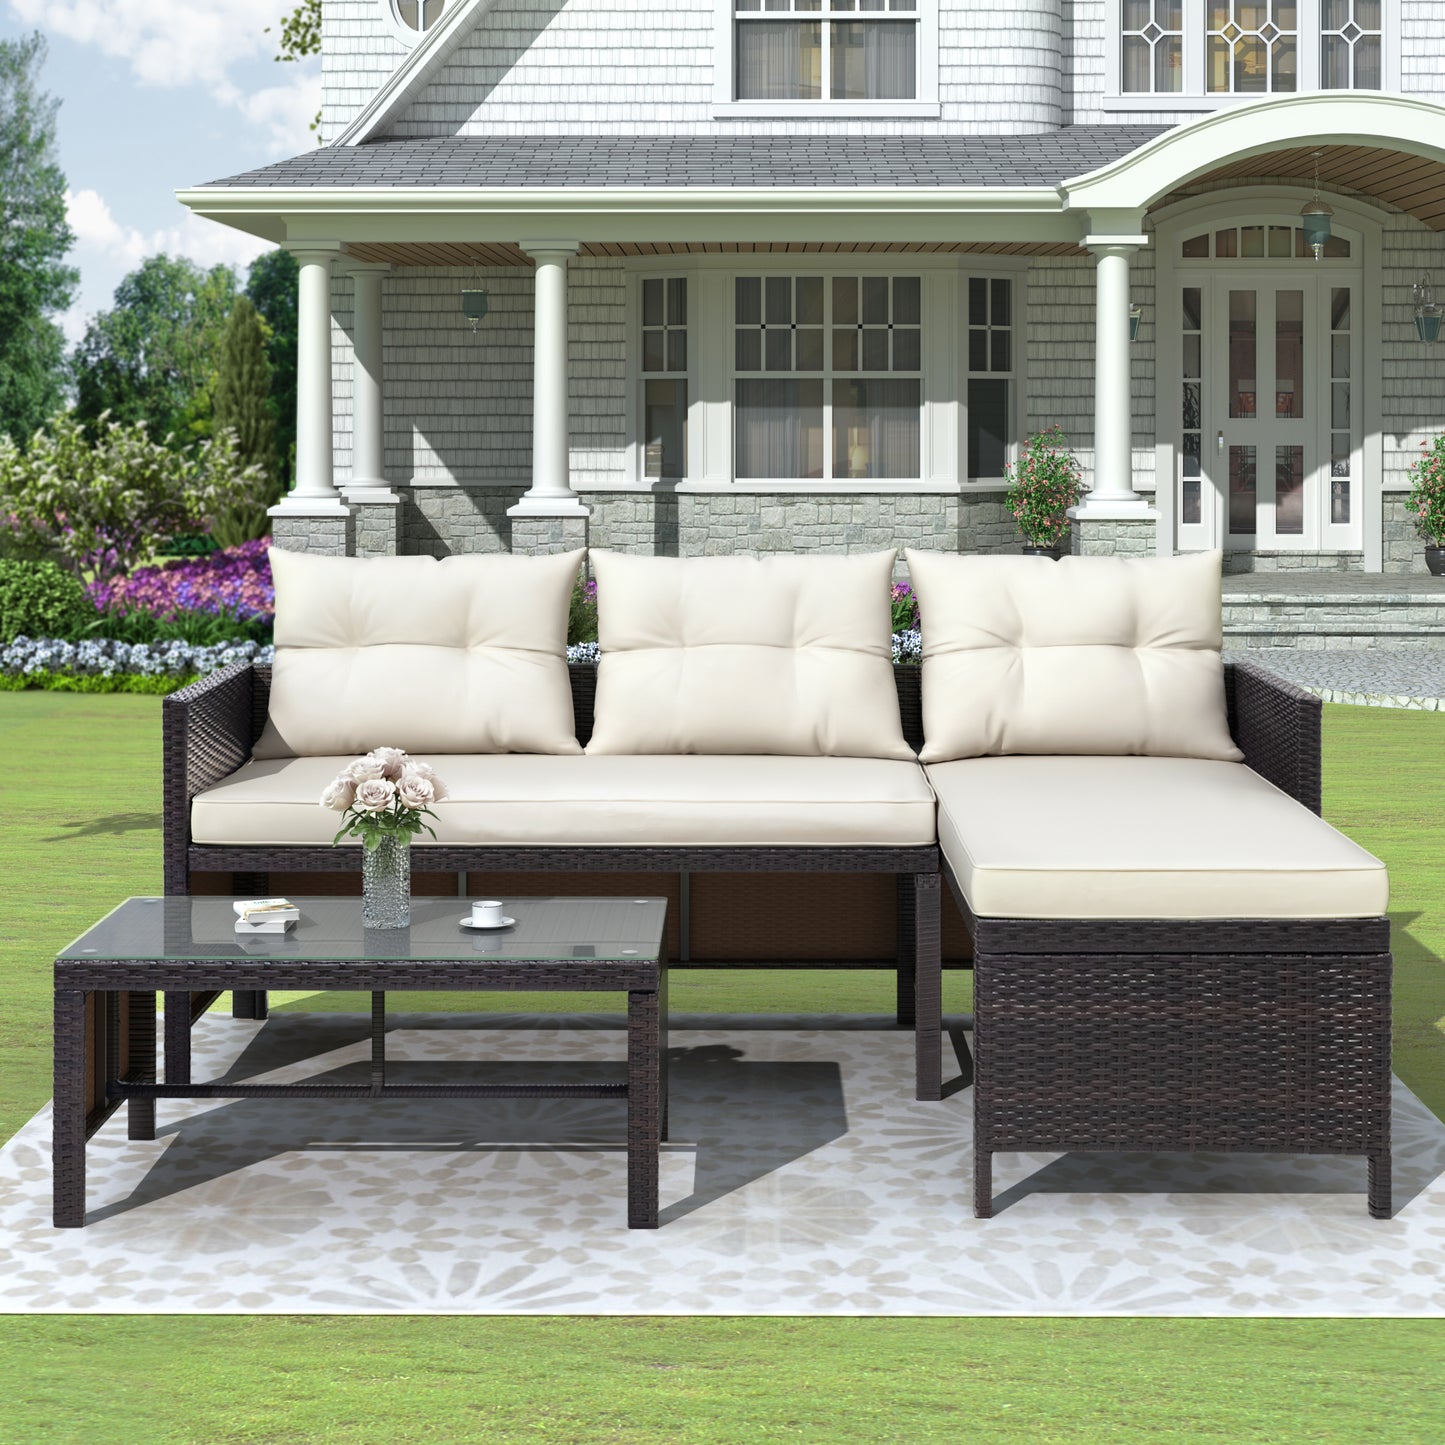 Syngar Patio Furniture Sectional Set, 3-Piece PE Wicker Cushioned Sofa Set, Outdoor Conversation Chair Set with Two-Seater Sofa, Lounge Sofa & Coffee Table, for Backyard, Poolside, Garden, Deck, D6030